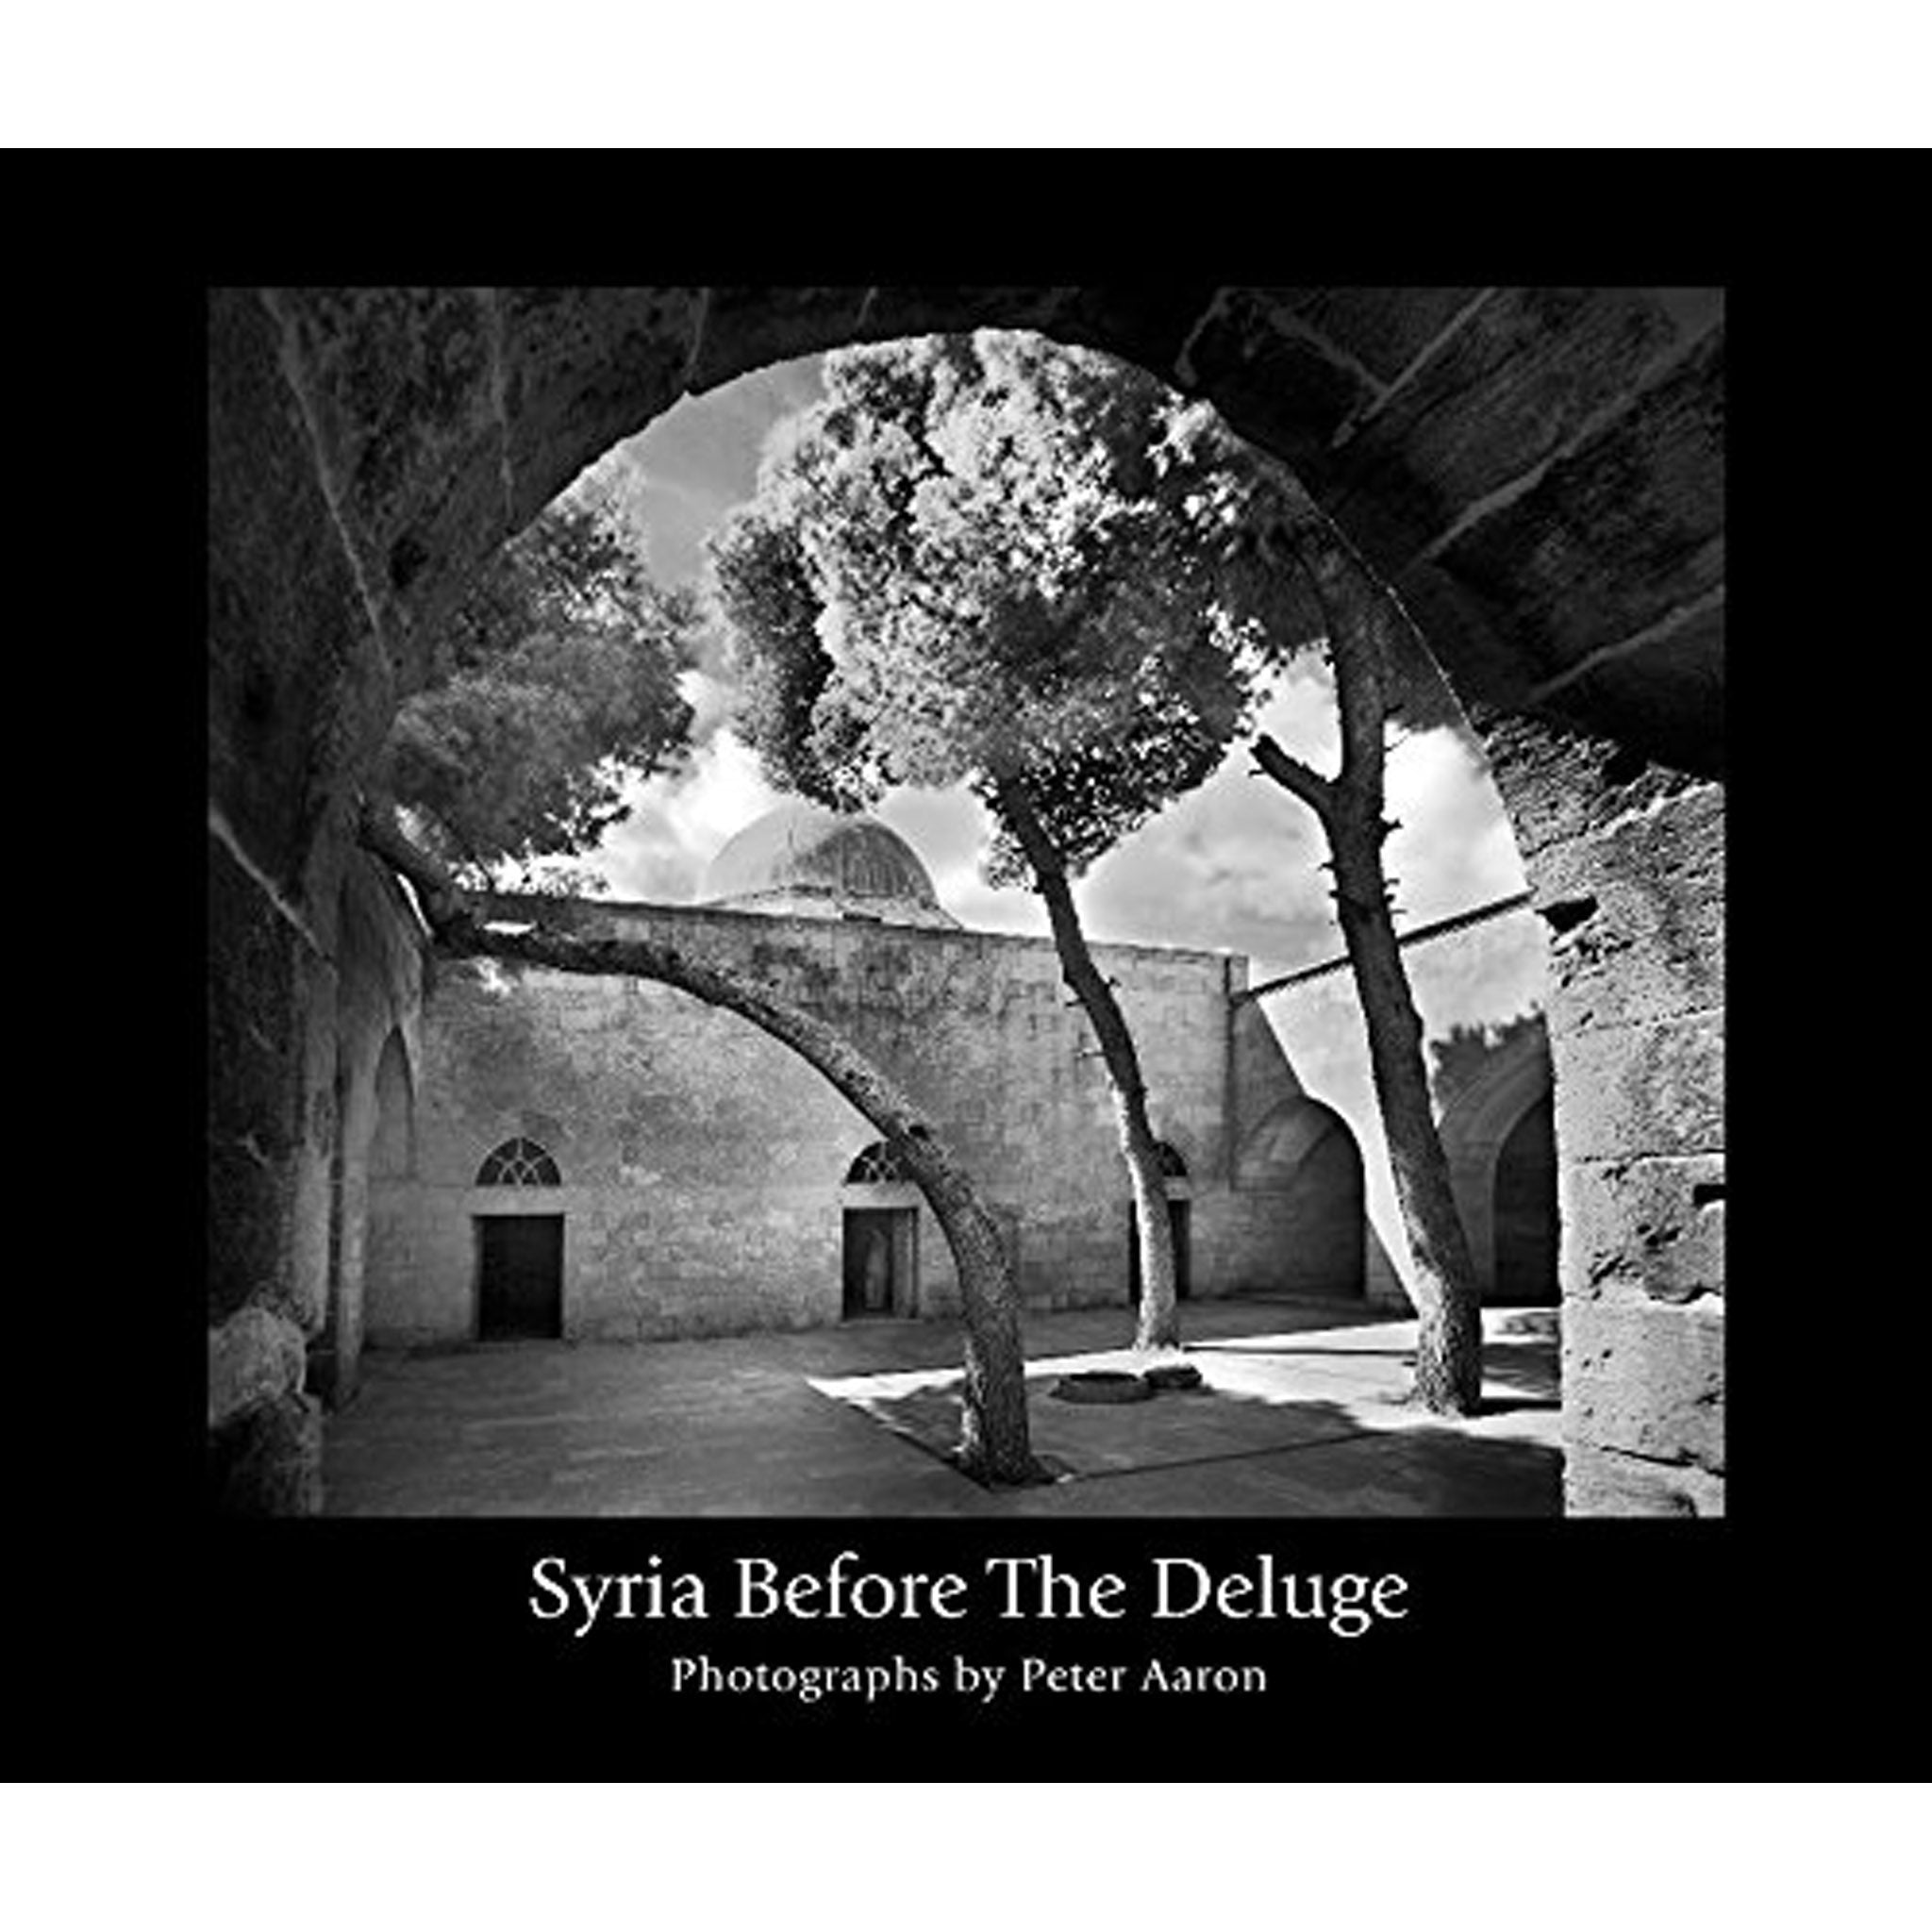 Syria Before the Deluge